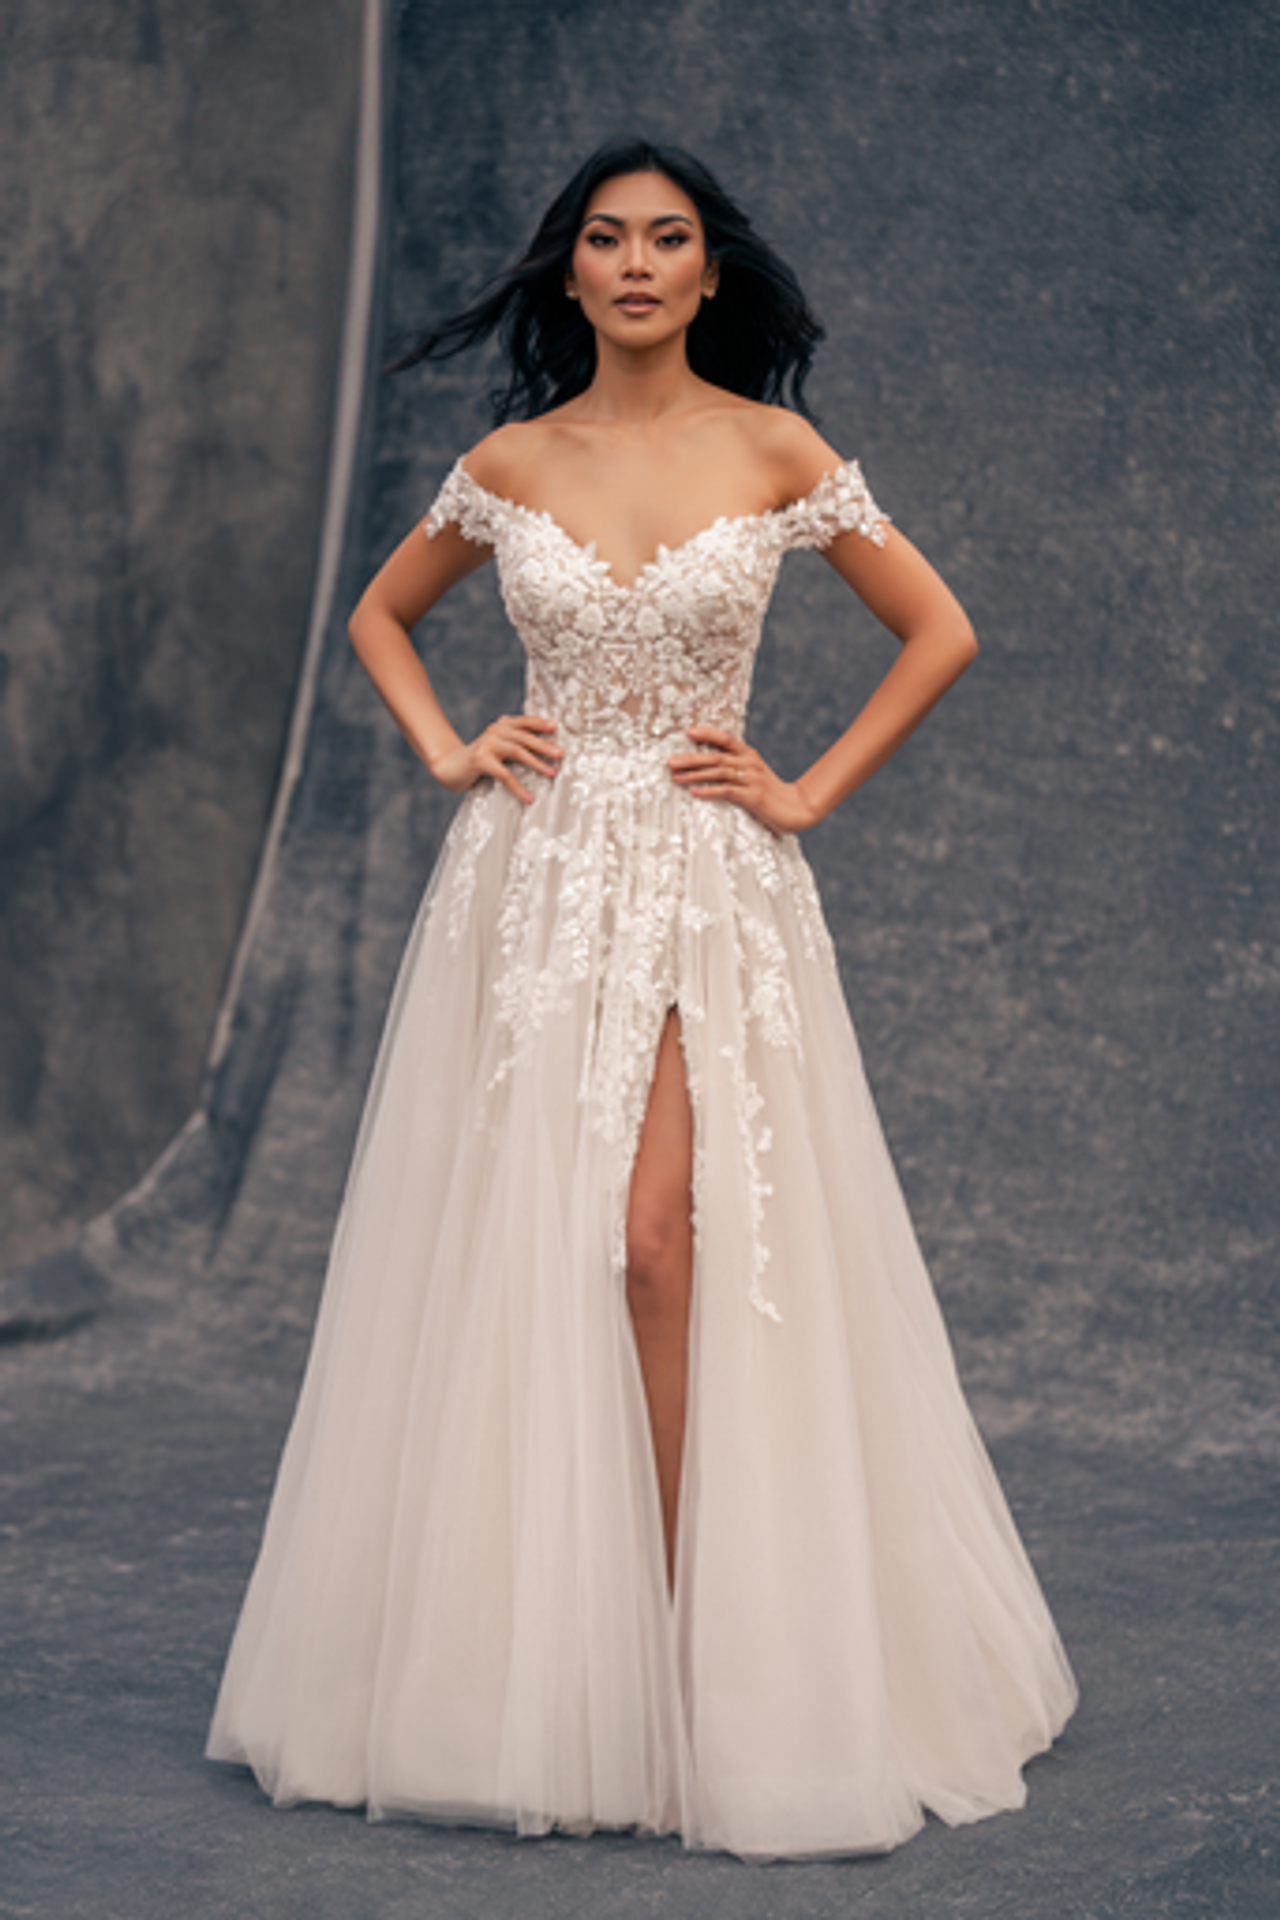 Sexy Feminin And Romantic Gown by Allure Bridals